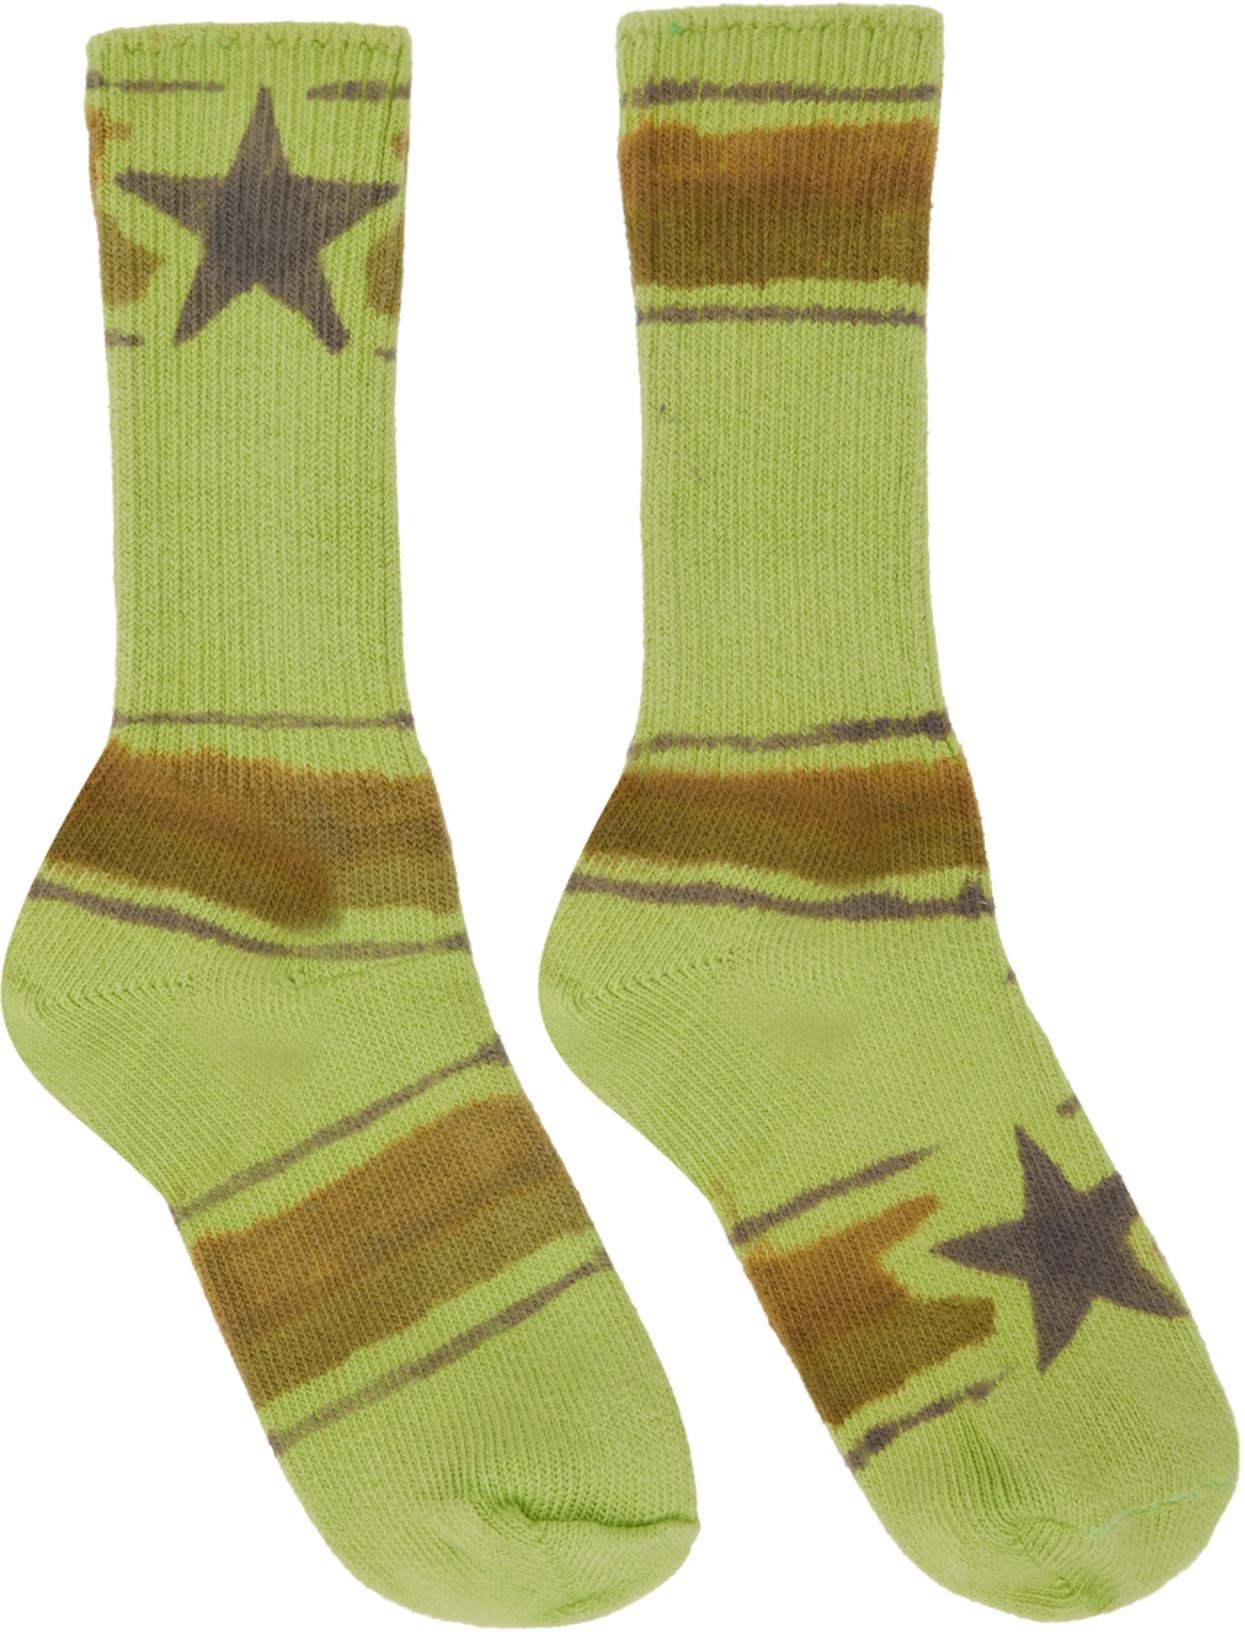 Green Dyed Striped Socks by COLLINA STRADA